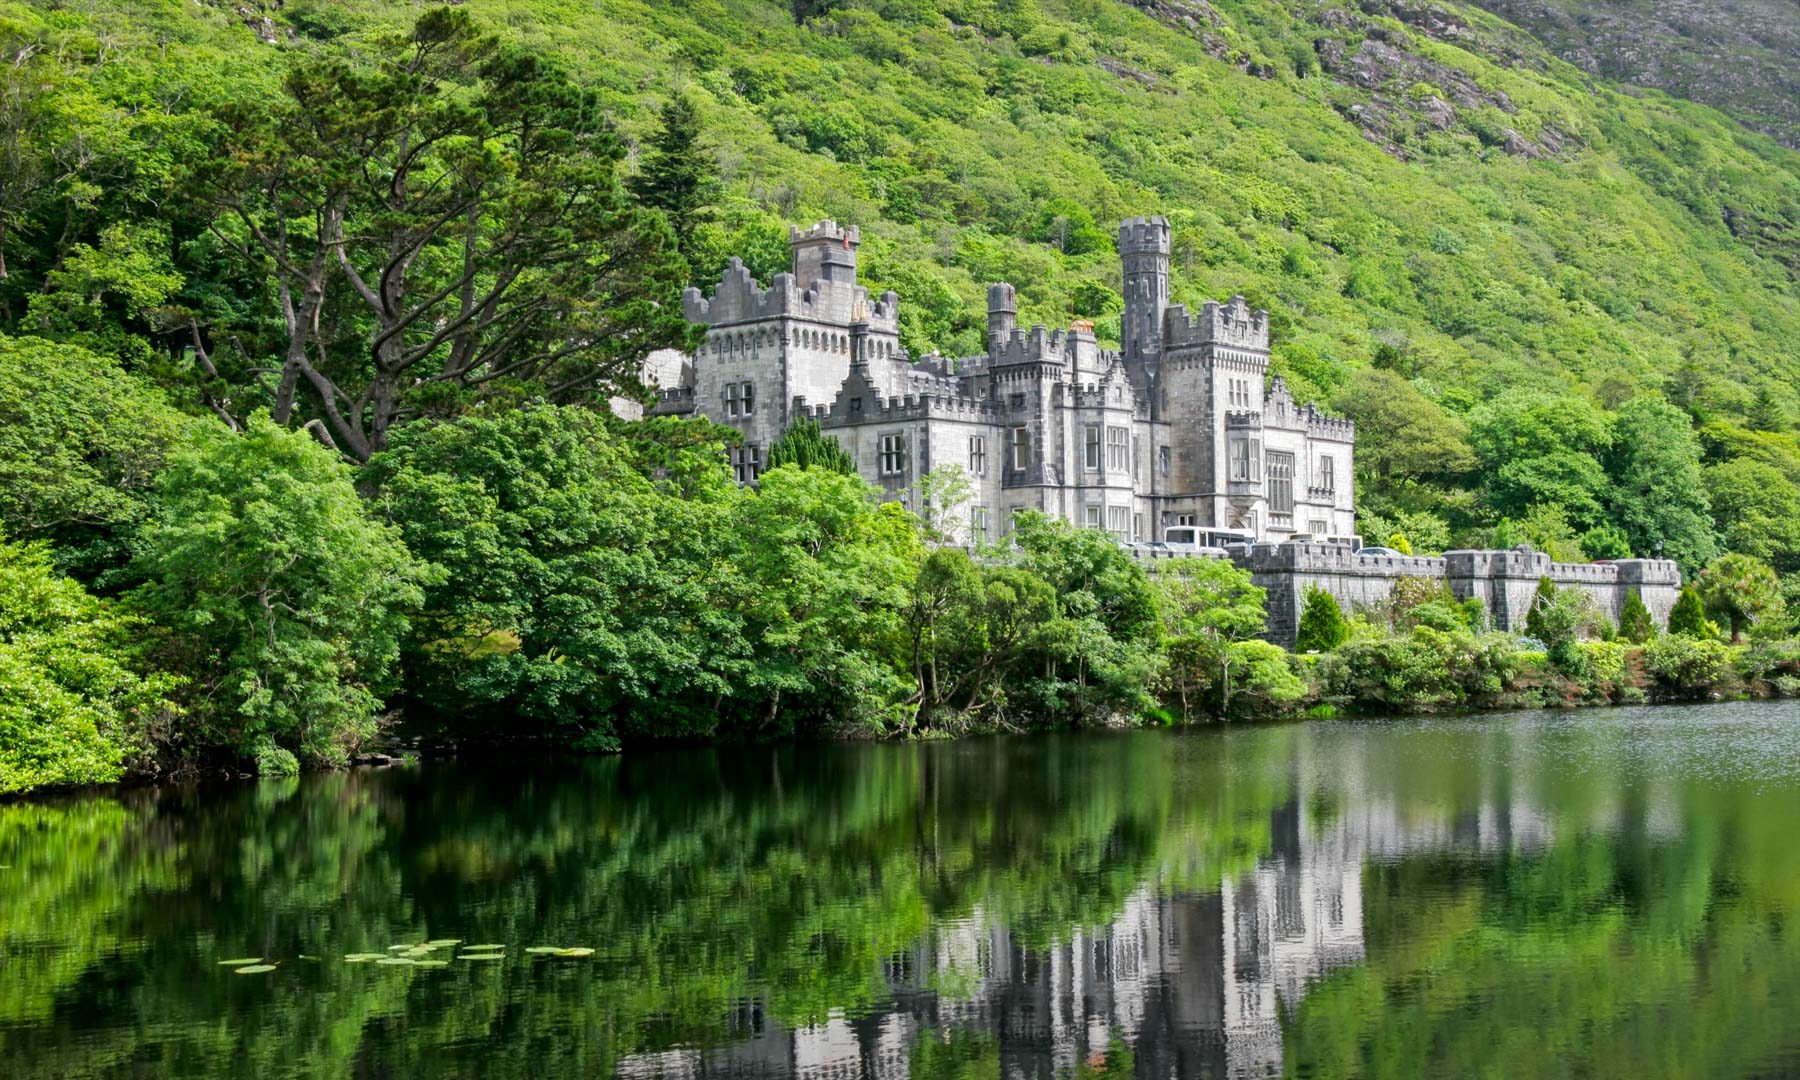 The Best Things to do in Ireland